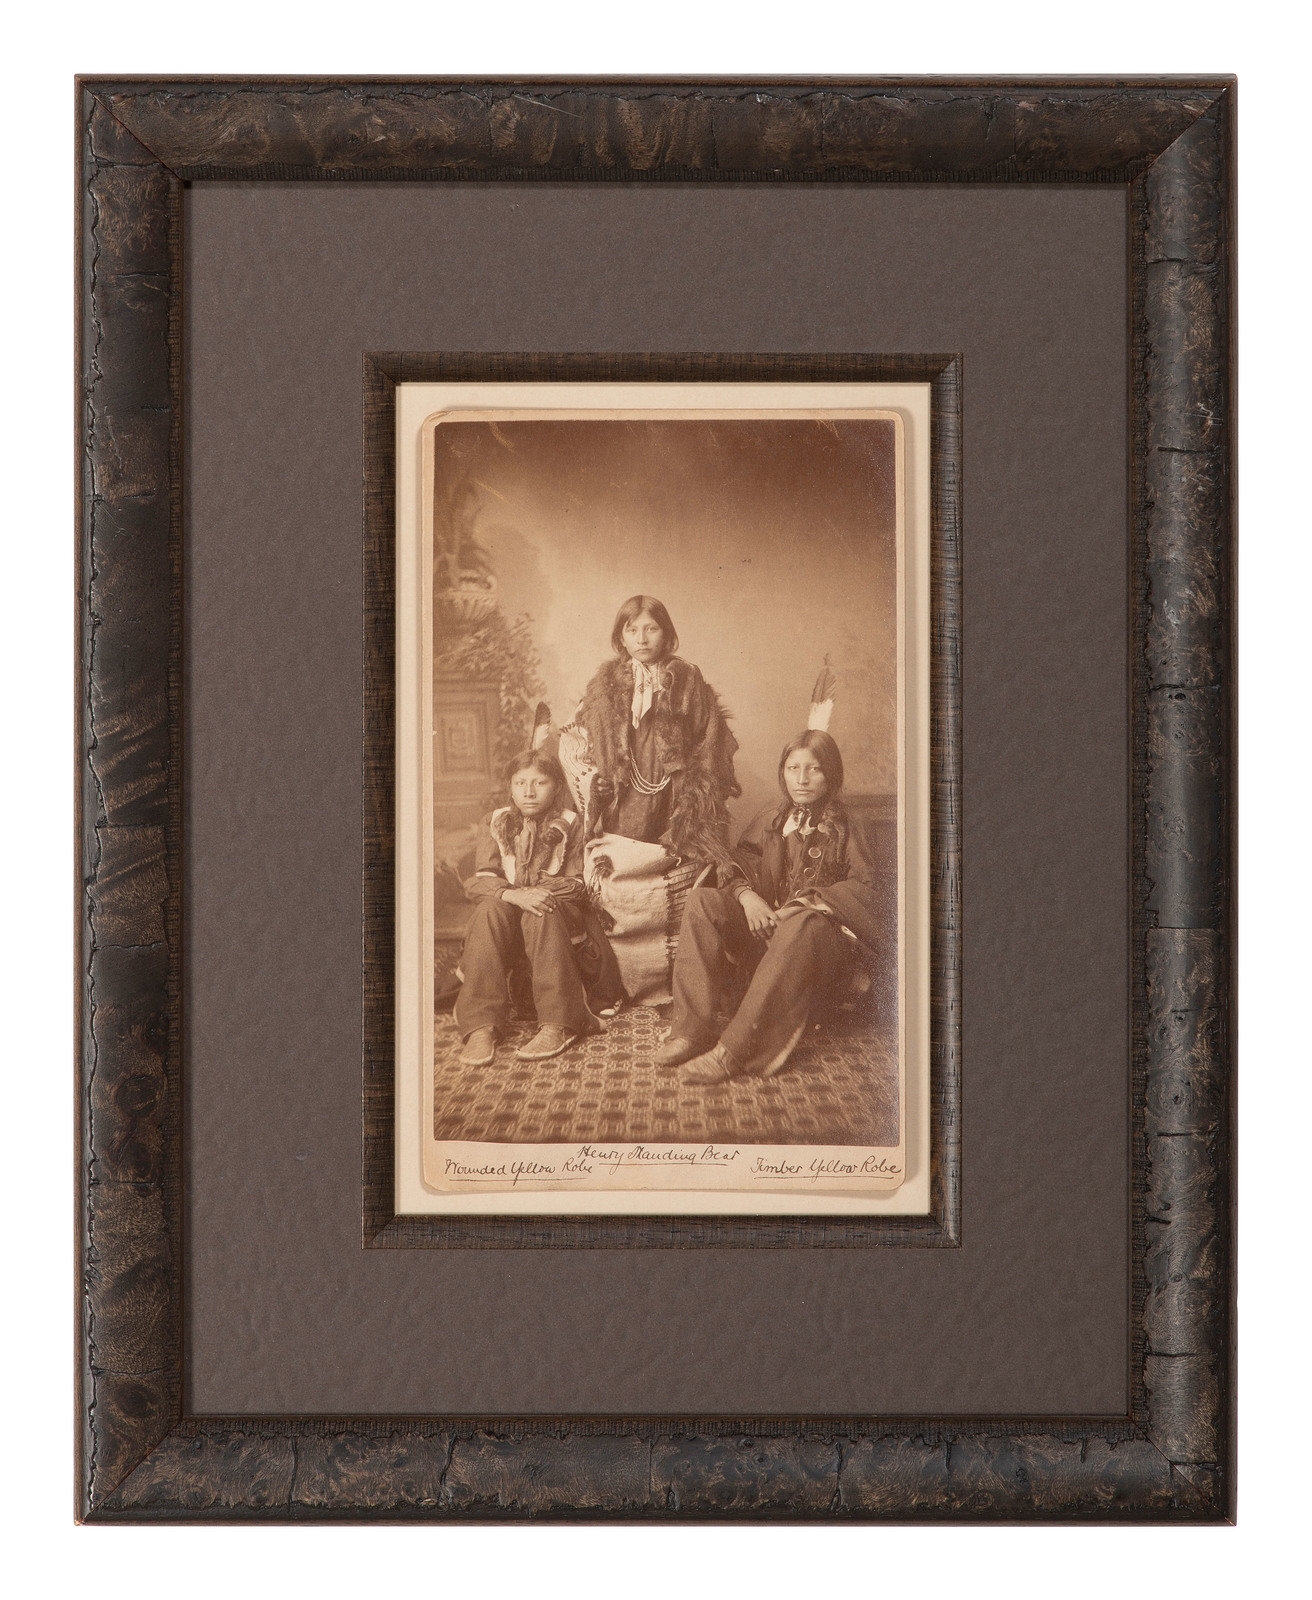 Artwork by John Nicholas Choate, Boudoir card featuring a trio of Santee Sioux students of Carlisle Indian School, identified on mount as Henry Standing Bear, Made of Boudoir card